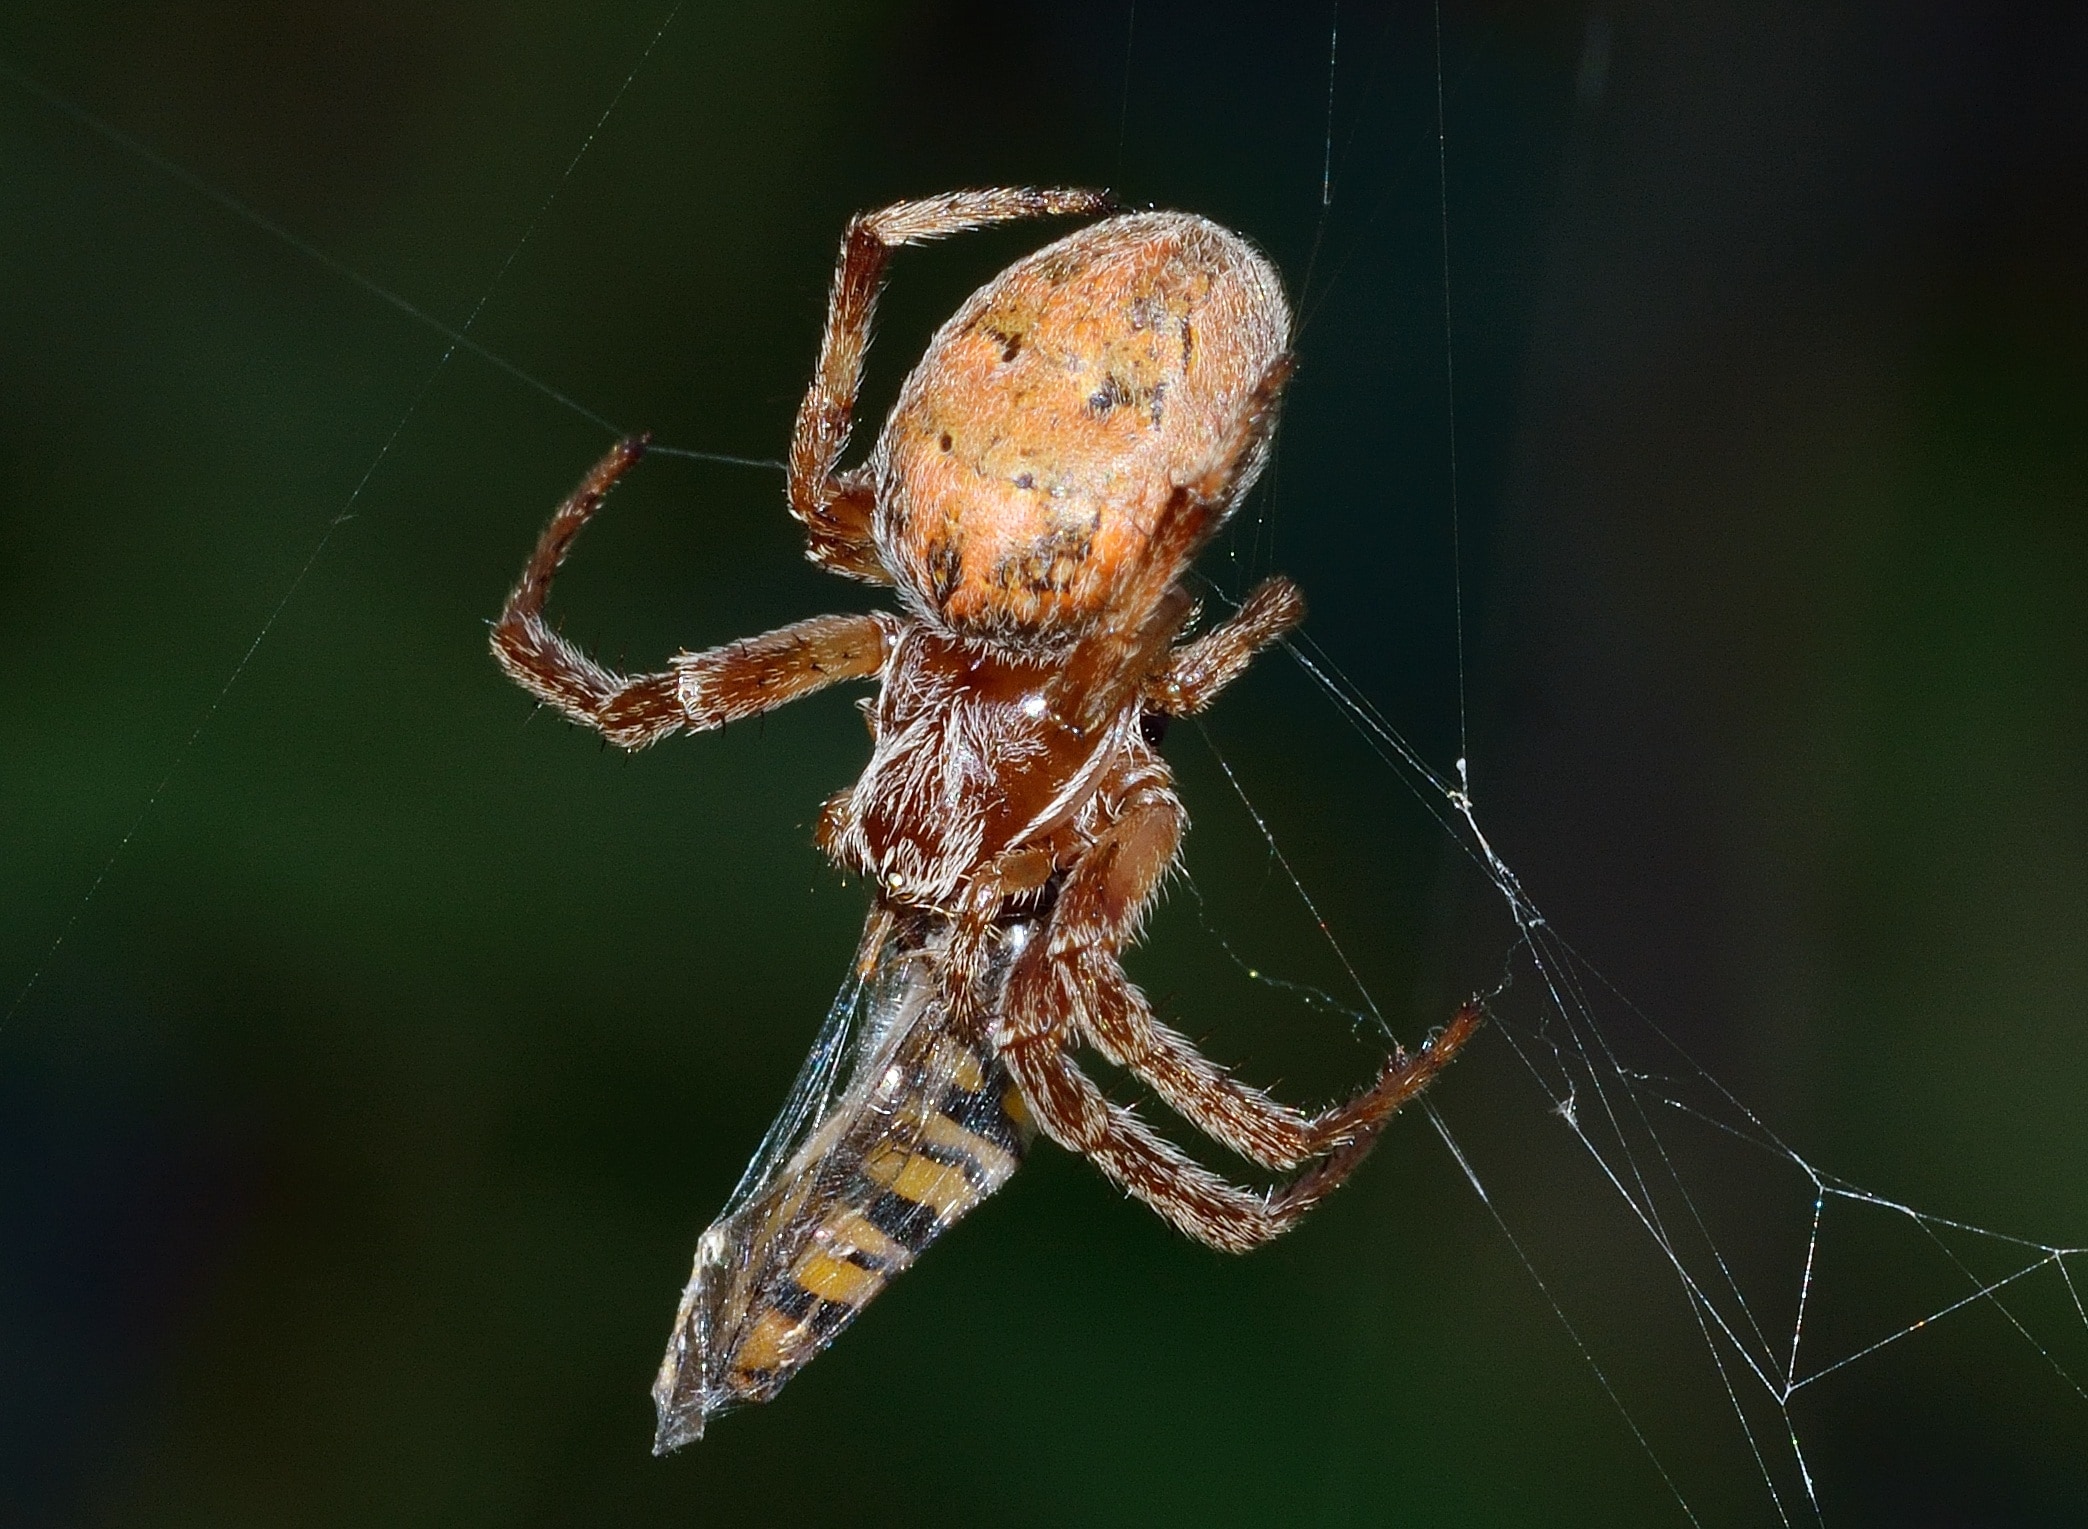 Web, Insects, Prey, Spider, spider, one animal